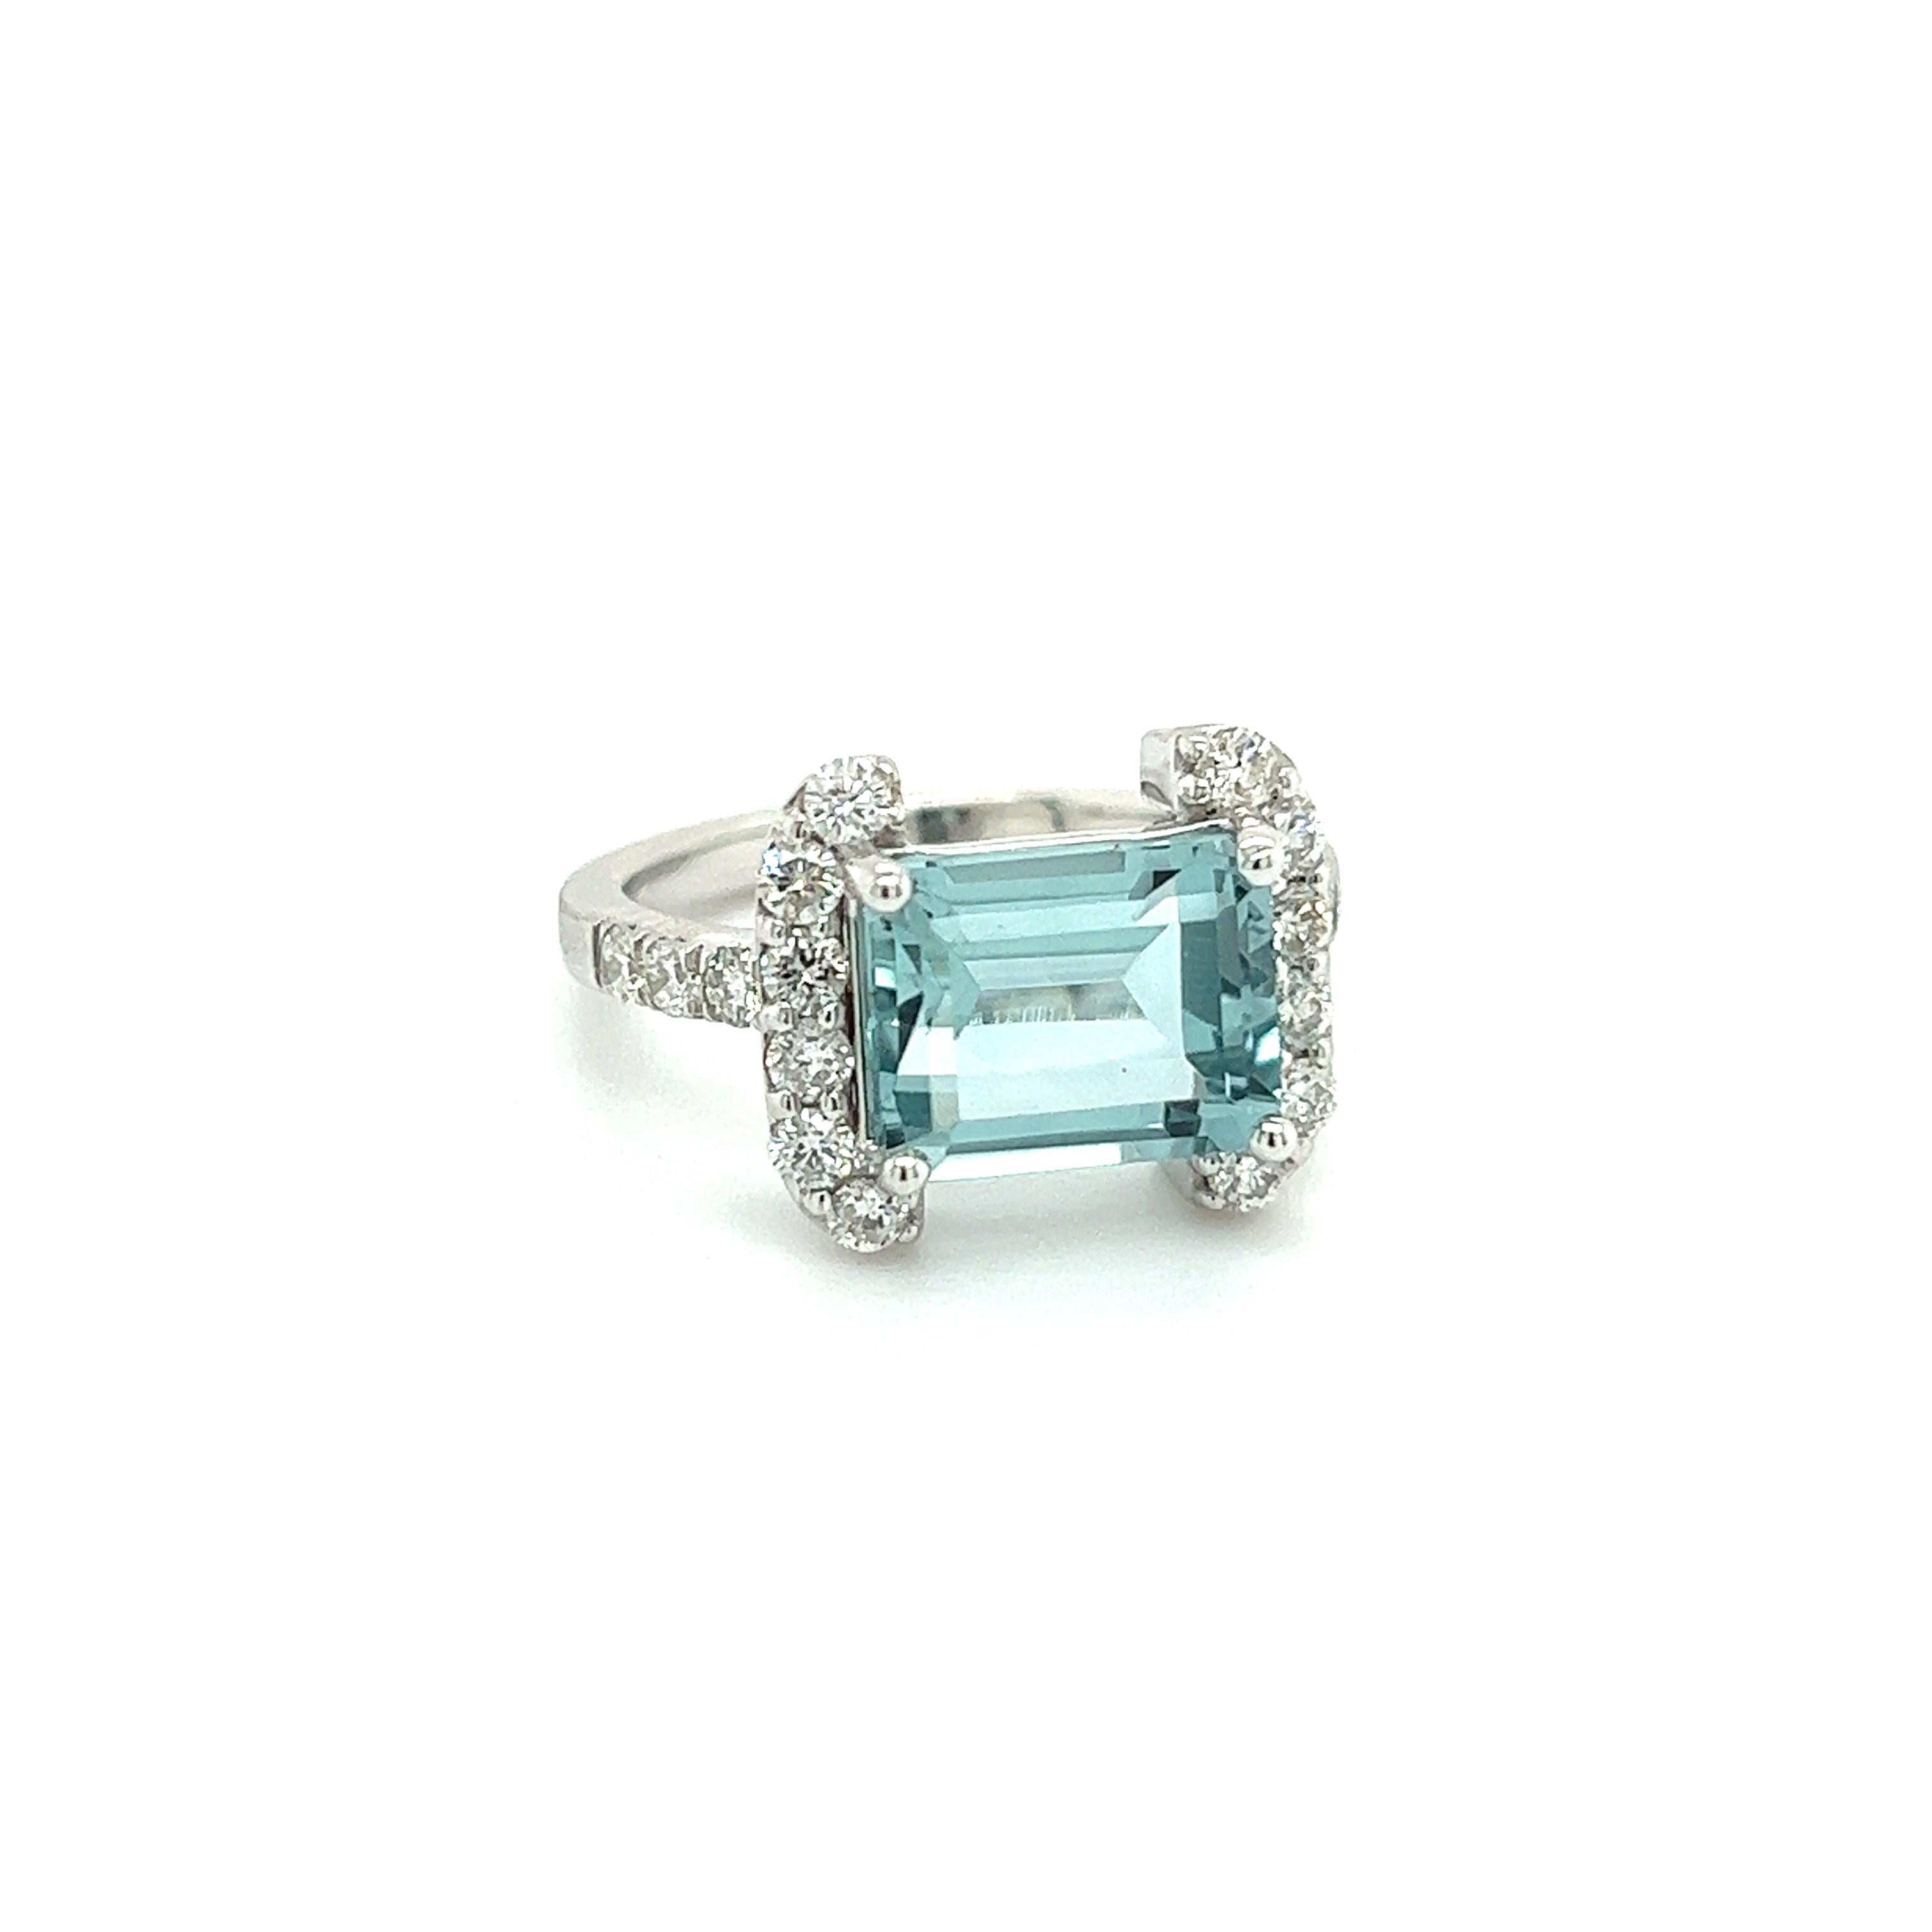 Natural Aquamarine Diamond Ring 6.5 14k white Gold 6.09 TCW Certified $4,690 217095

Nothing says, “I Love you” more than Diamonds and Pearls!

This Aquamarine ring has been Certified, Inspected, and Appraised by Gemological Appraisal